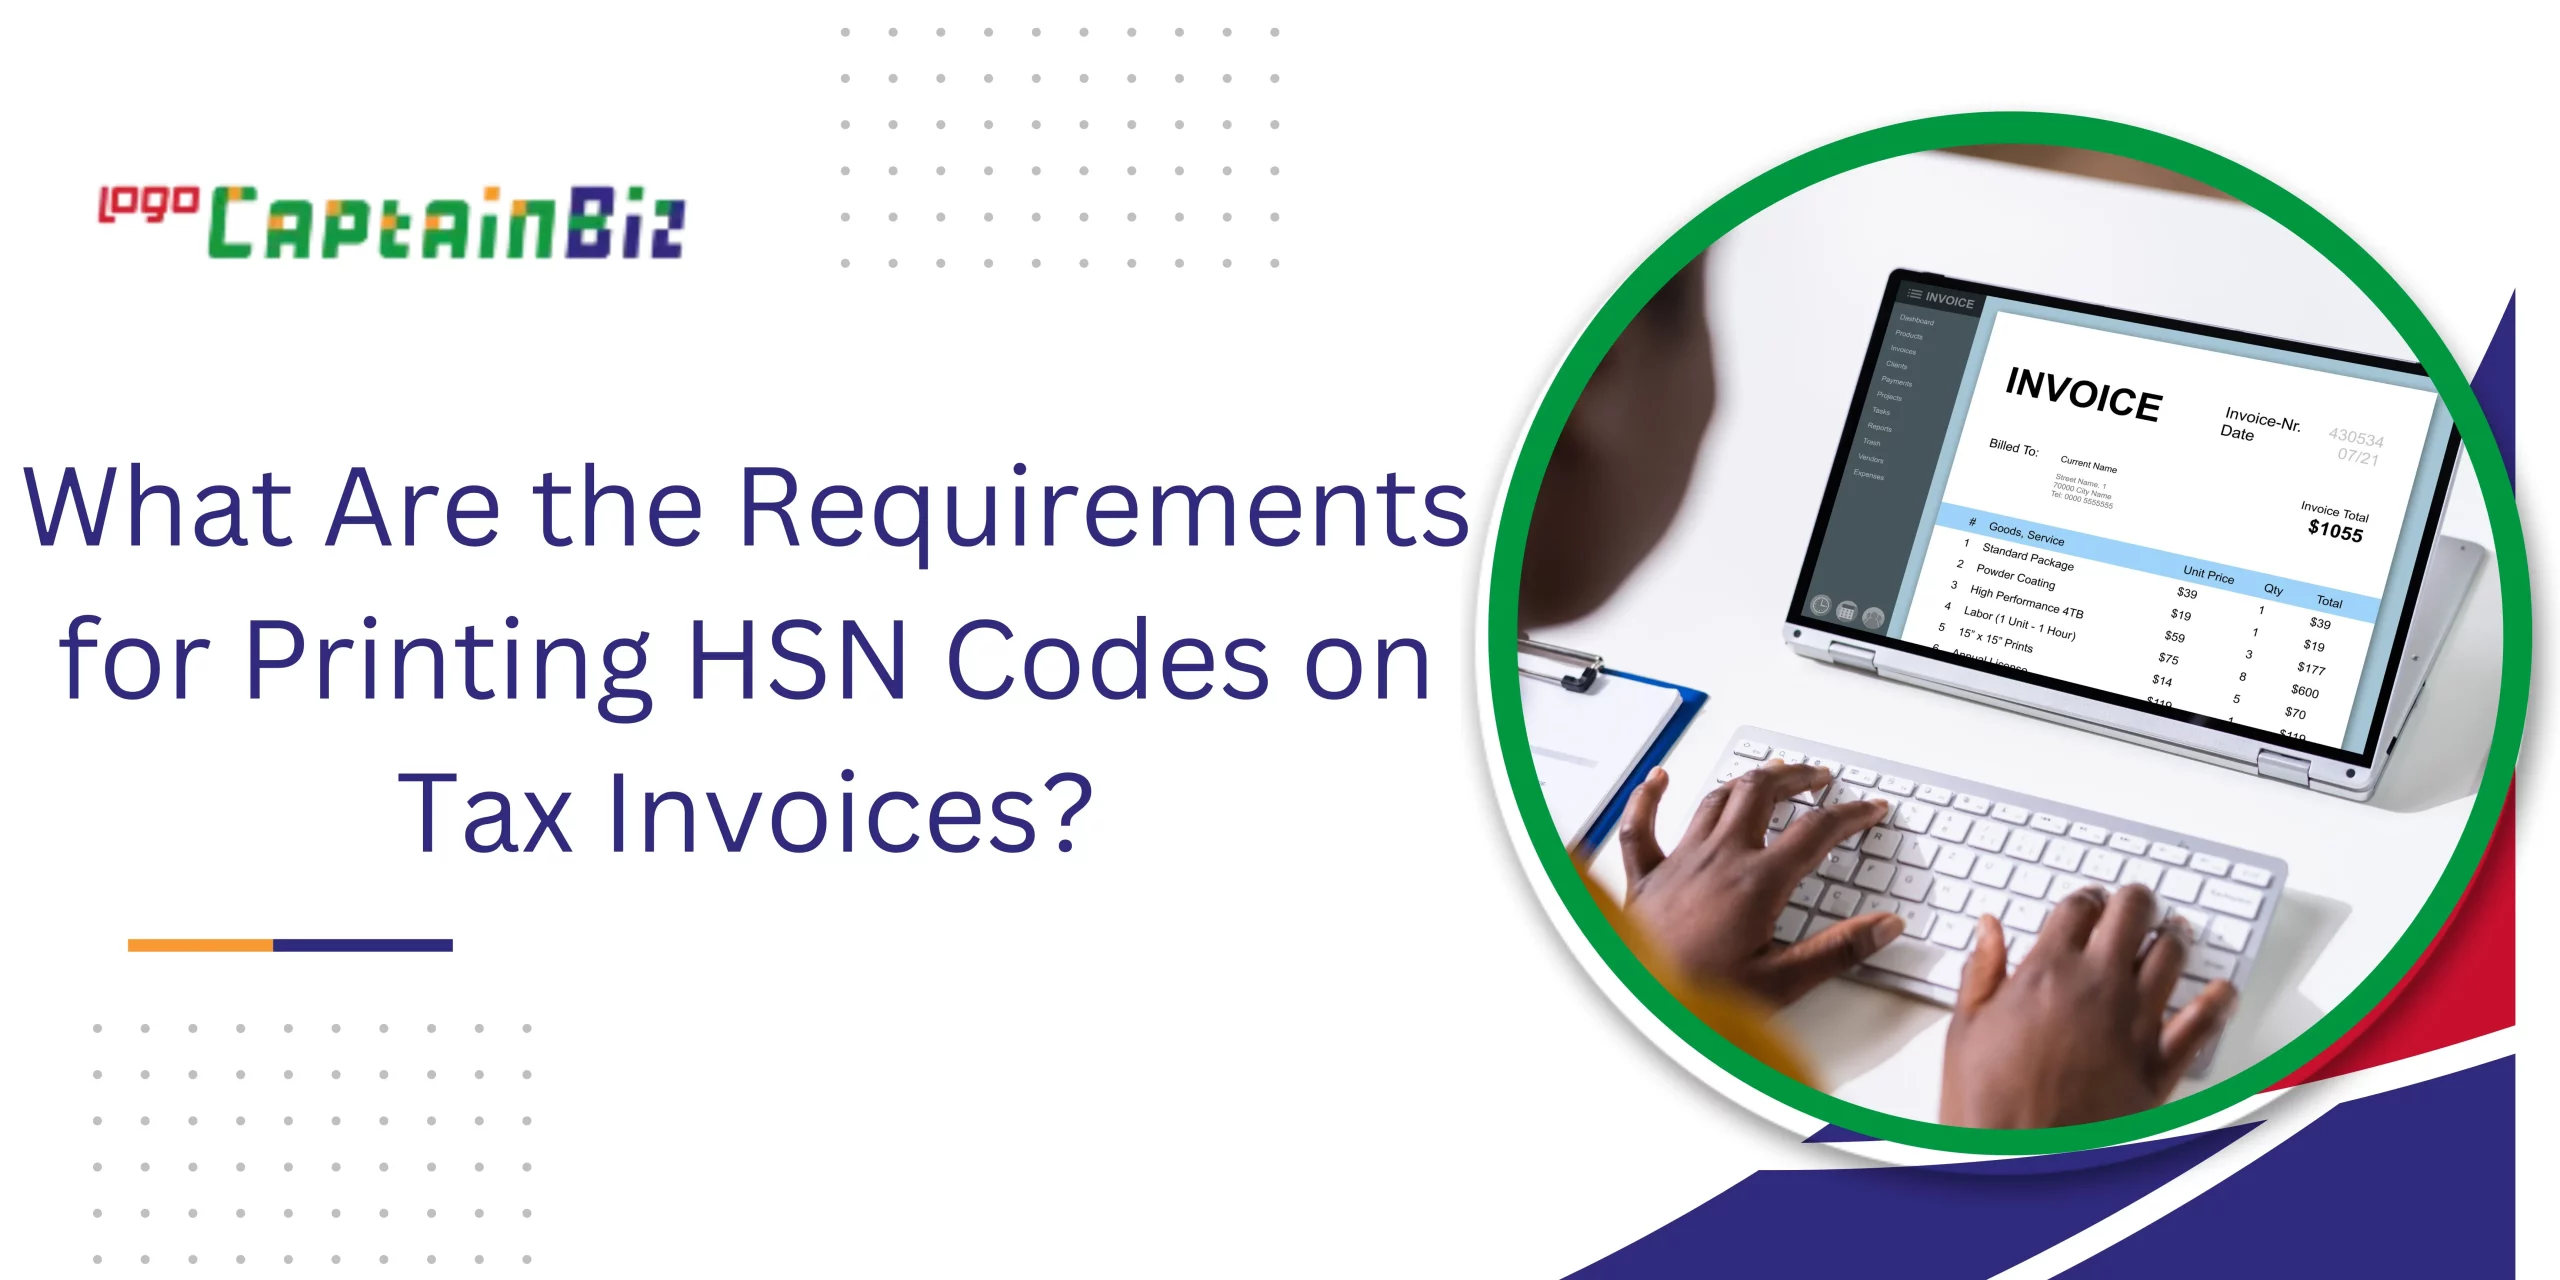 CaptainBiz: What Are the Requirements for Printing HSN Codes on Tax Invoices